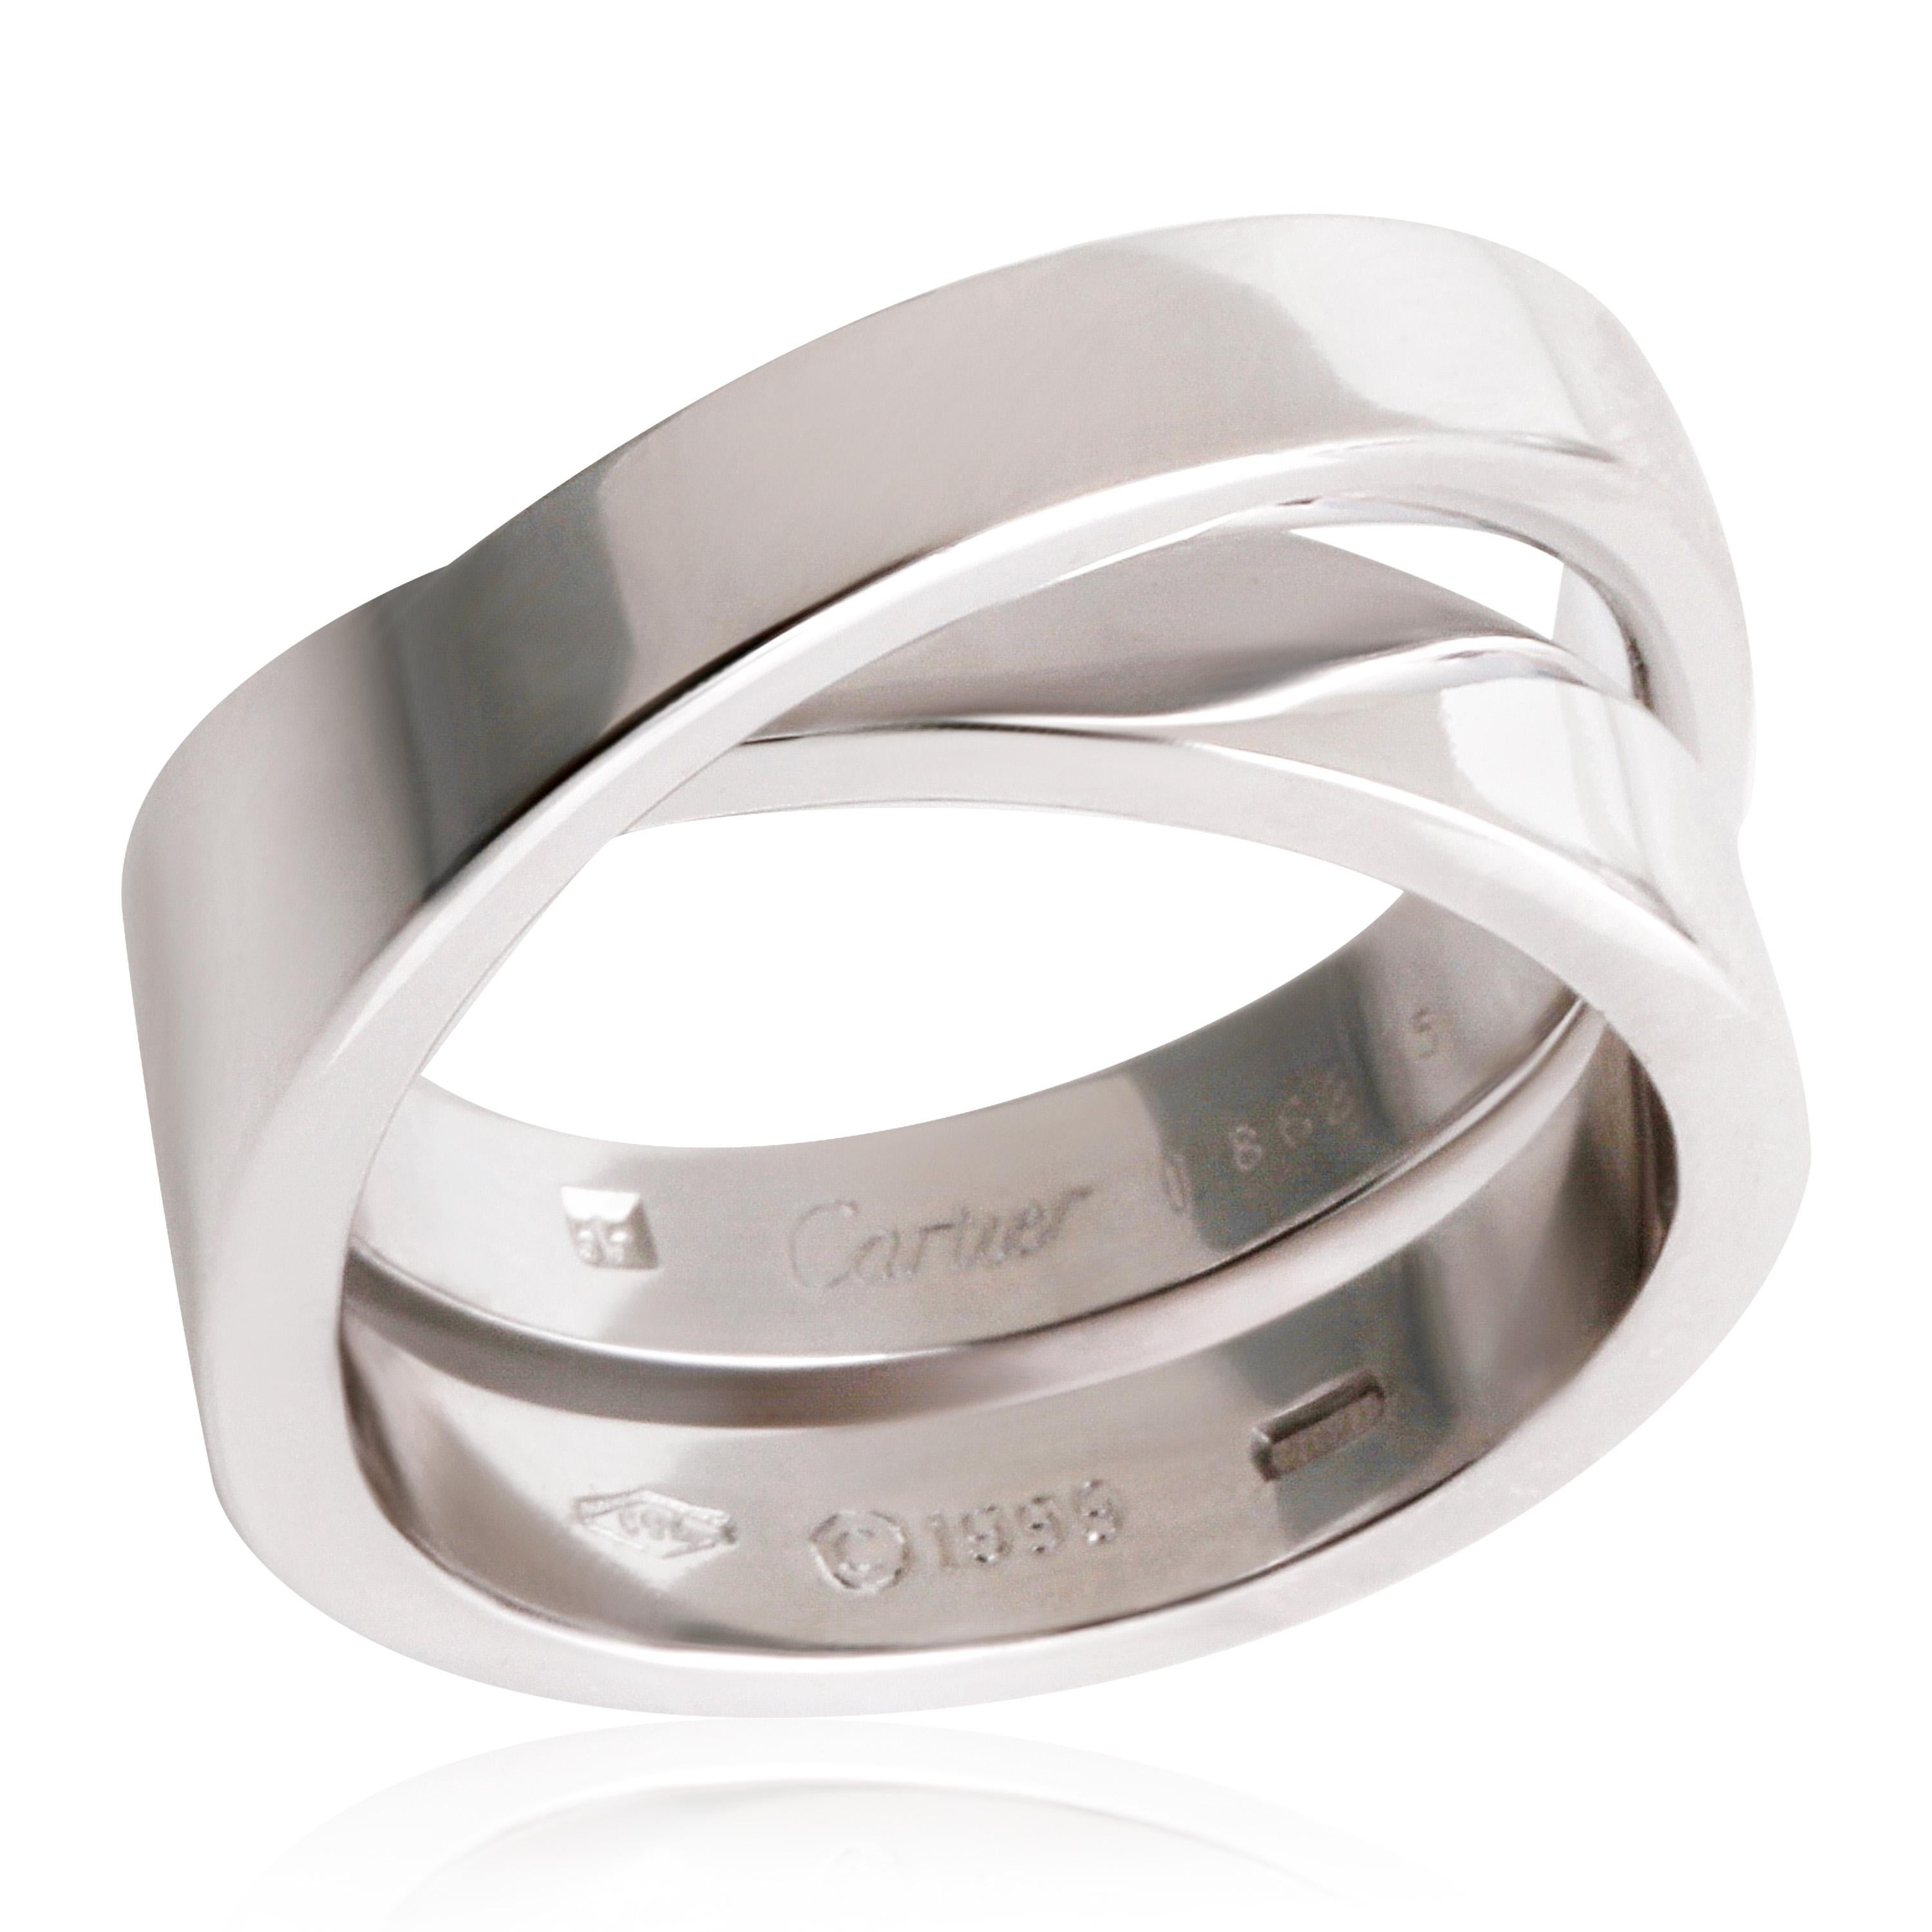 Cartier Paris Nouvelle Vague Ring in 18k White Gold

PRIMARY DETAILS
SKU: 119560
Listing Title: Cartier Paris Nouvelle Vague Ring in 18k White Gold
Condition Description: Retails for 3600 USD. In excellent condition and recently polished. Ring size